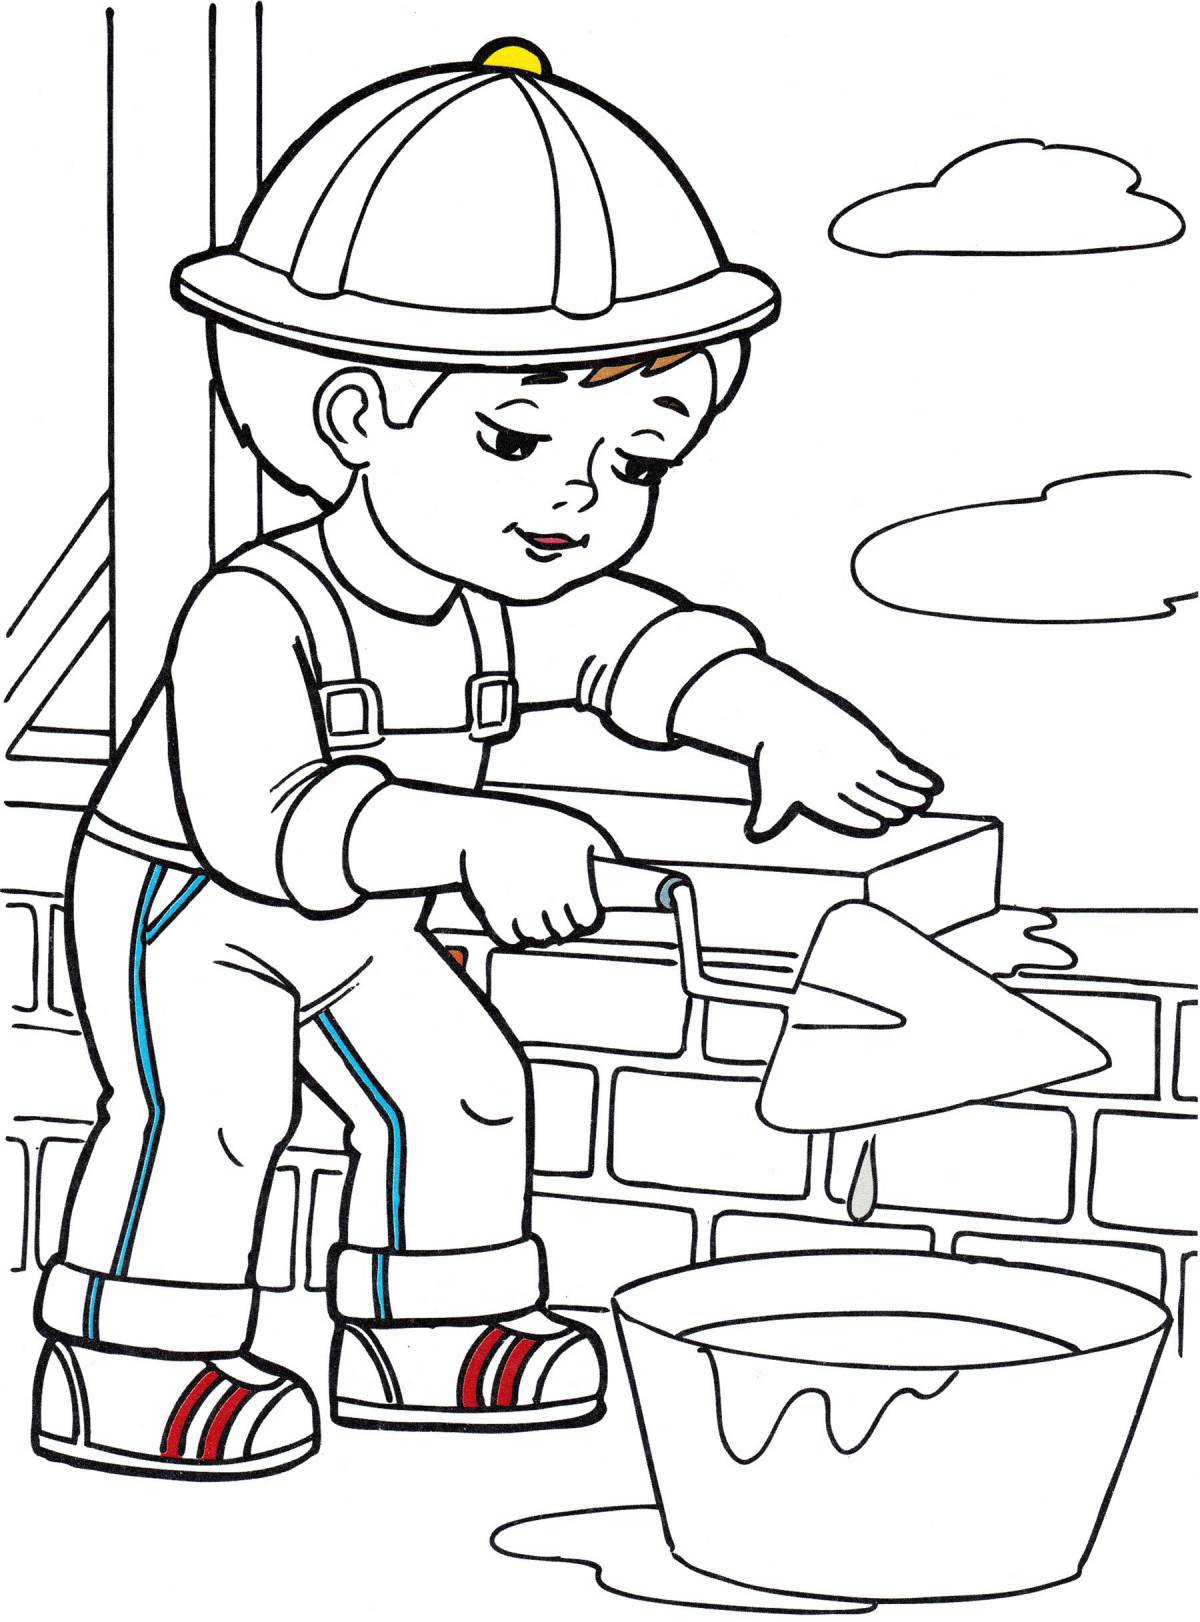 Constructor of coloring pages